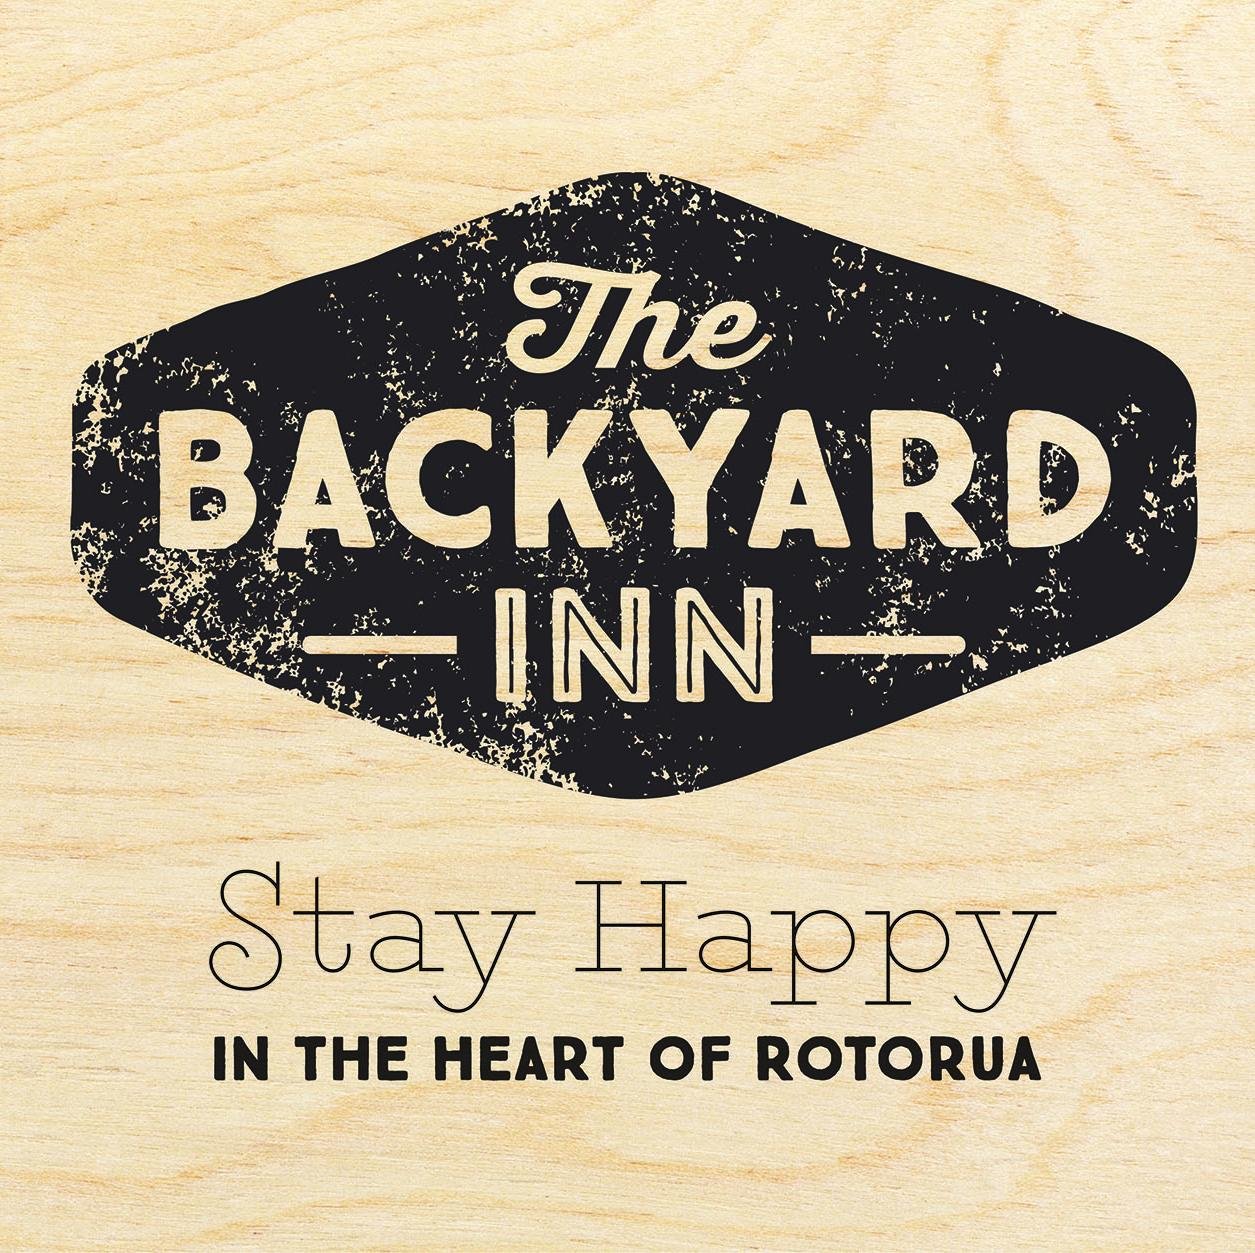 At The Backyard Inn, families can relax in a kid-friendly, safe environment. Travelers can enjoy their own spaces in great value dorm options or camping sites.